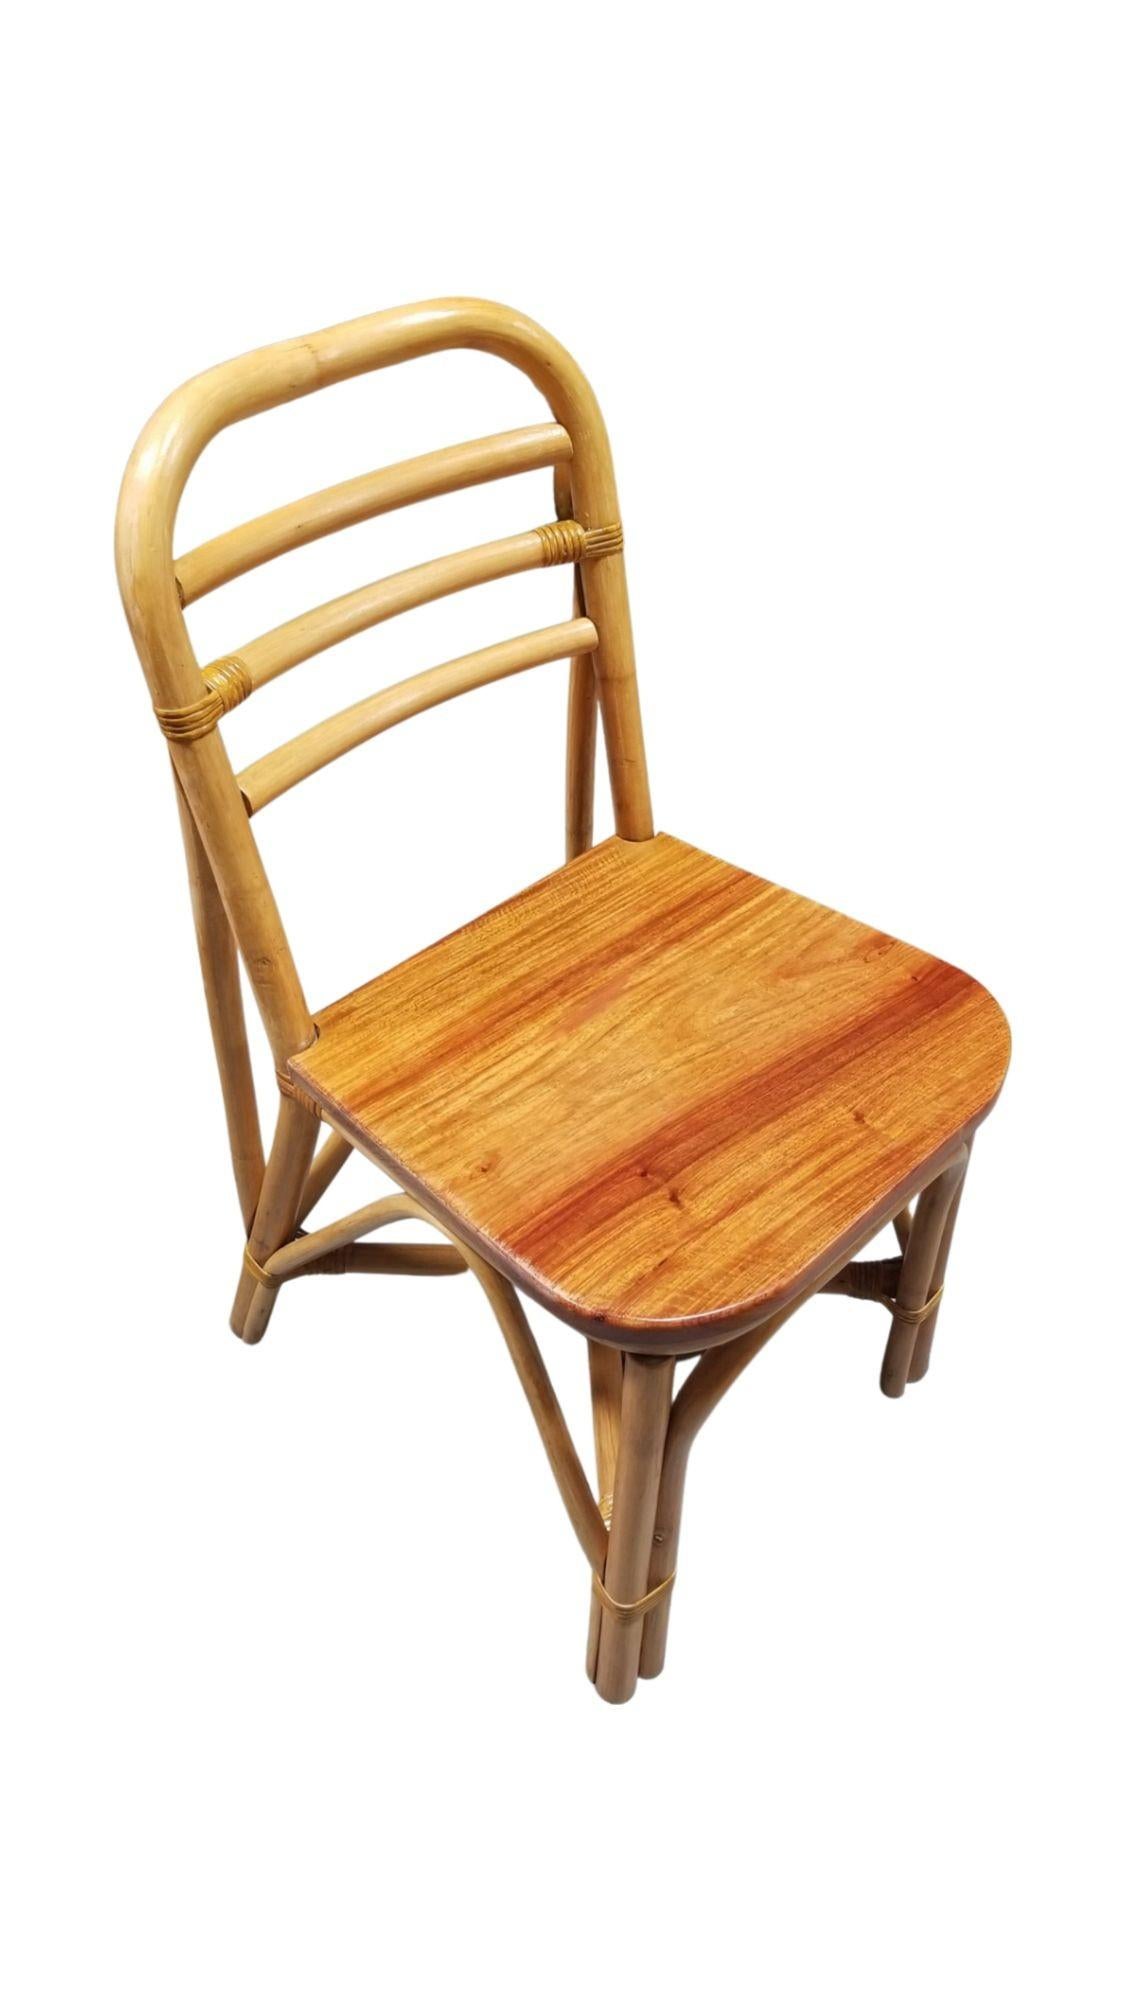 Vintage rattan dining room side chair with a solid mahogany seat included is a set of six chairs. Each chair features a three-strand rattan seat back with a mahogany seat.
1950, United States
We only purchase and sell only the best and finest rattan